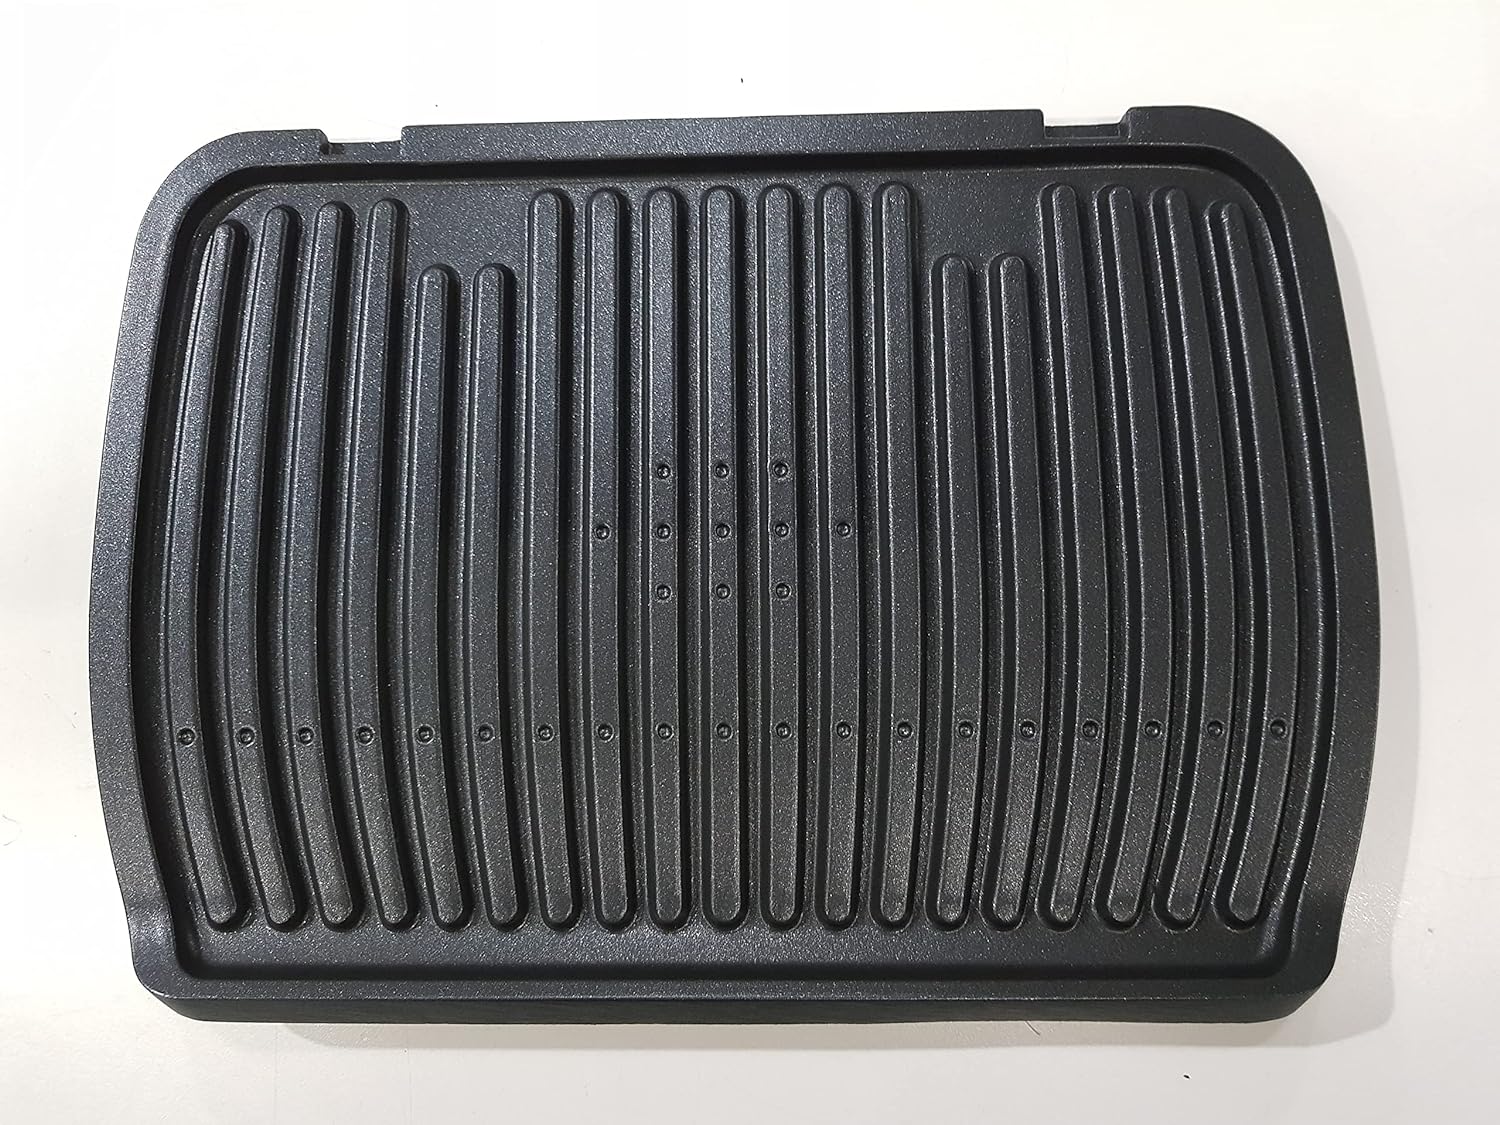 Group SEB Top Grill Plate Compatible with/Replacement Part for Tefal TS-01043480 GC750D OptiGrill Contact Grill